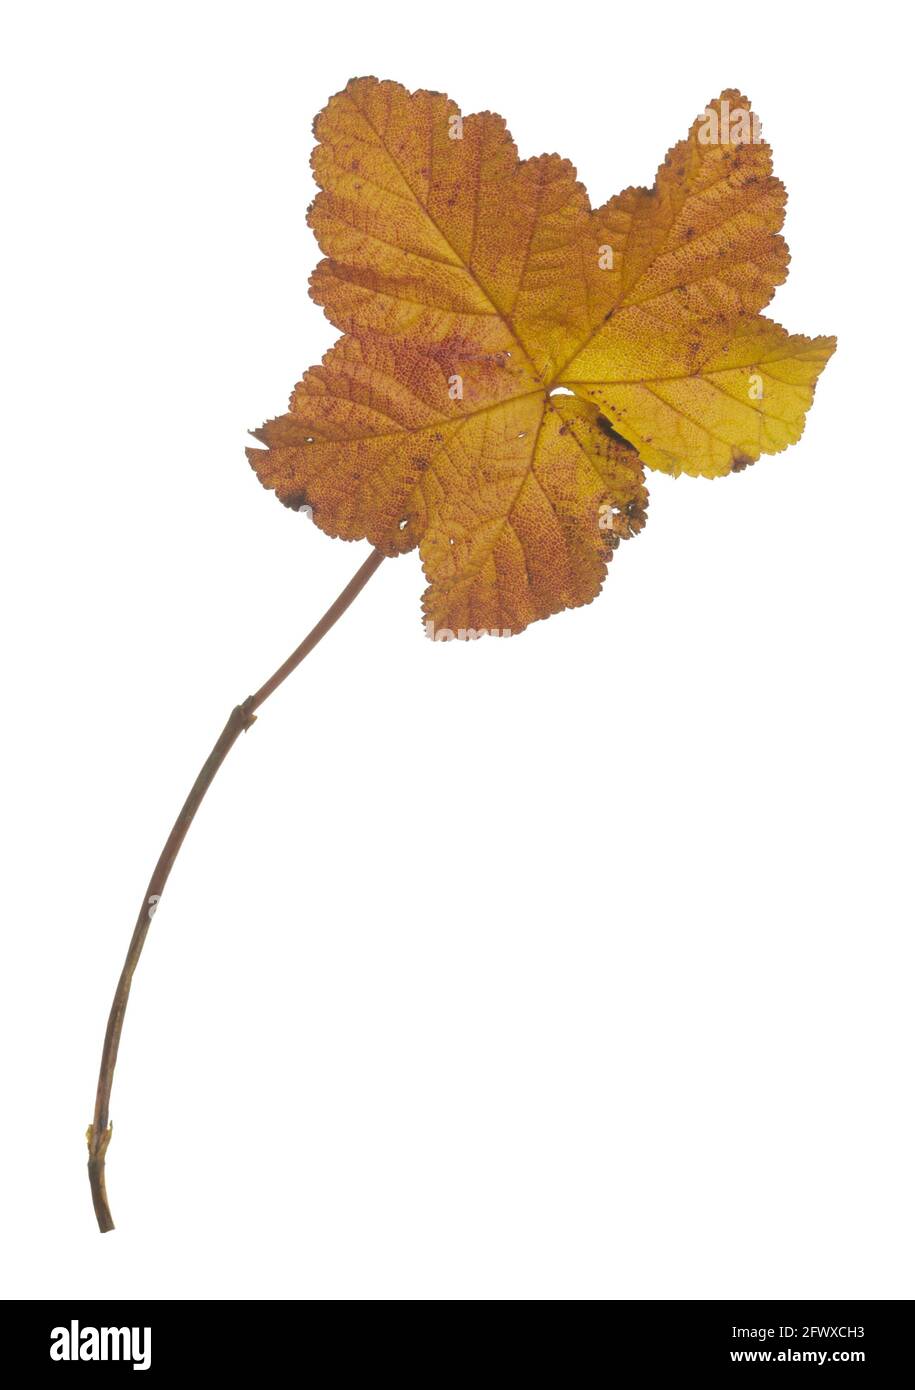 Cloudberry, Rubus chamaemorus leaf in autumn colors isolated on white background Stock Photo